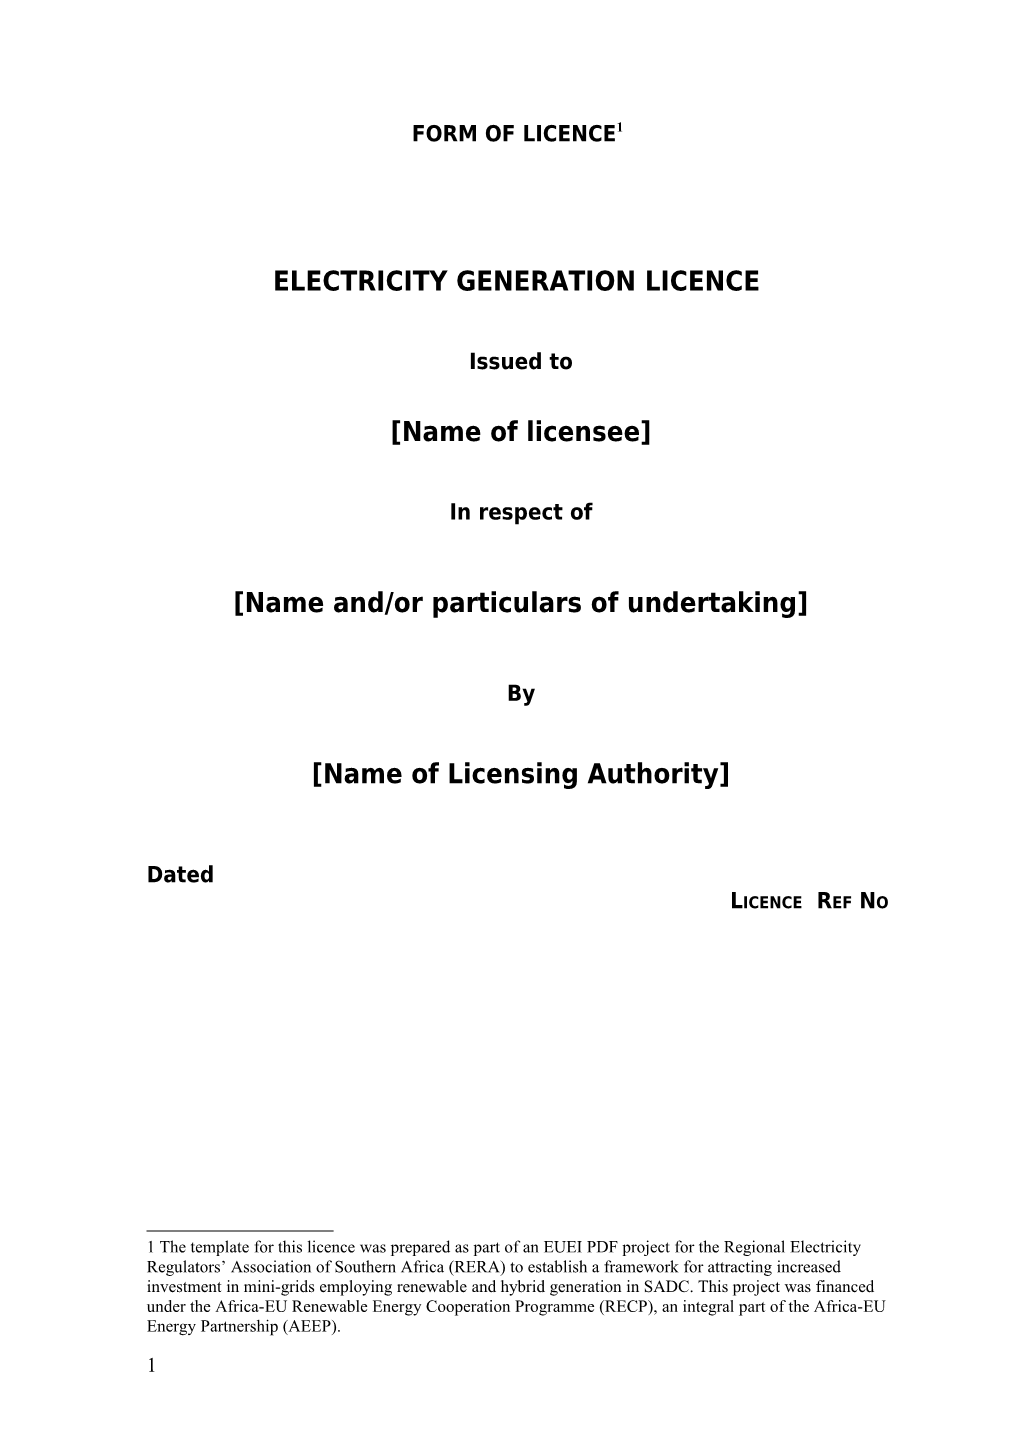 Form of Licence 1